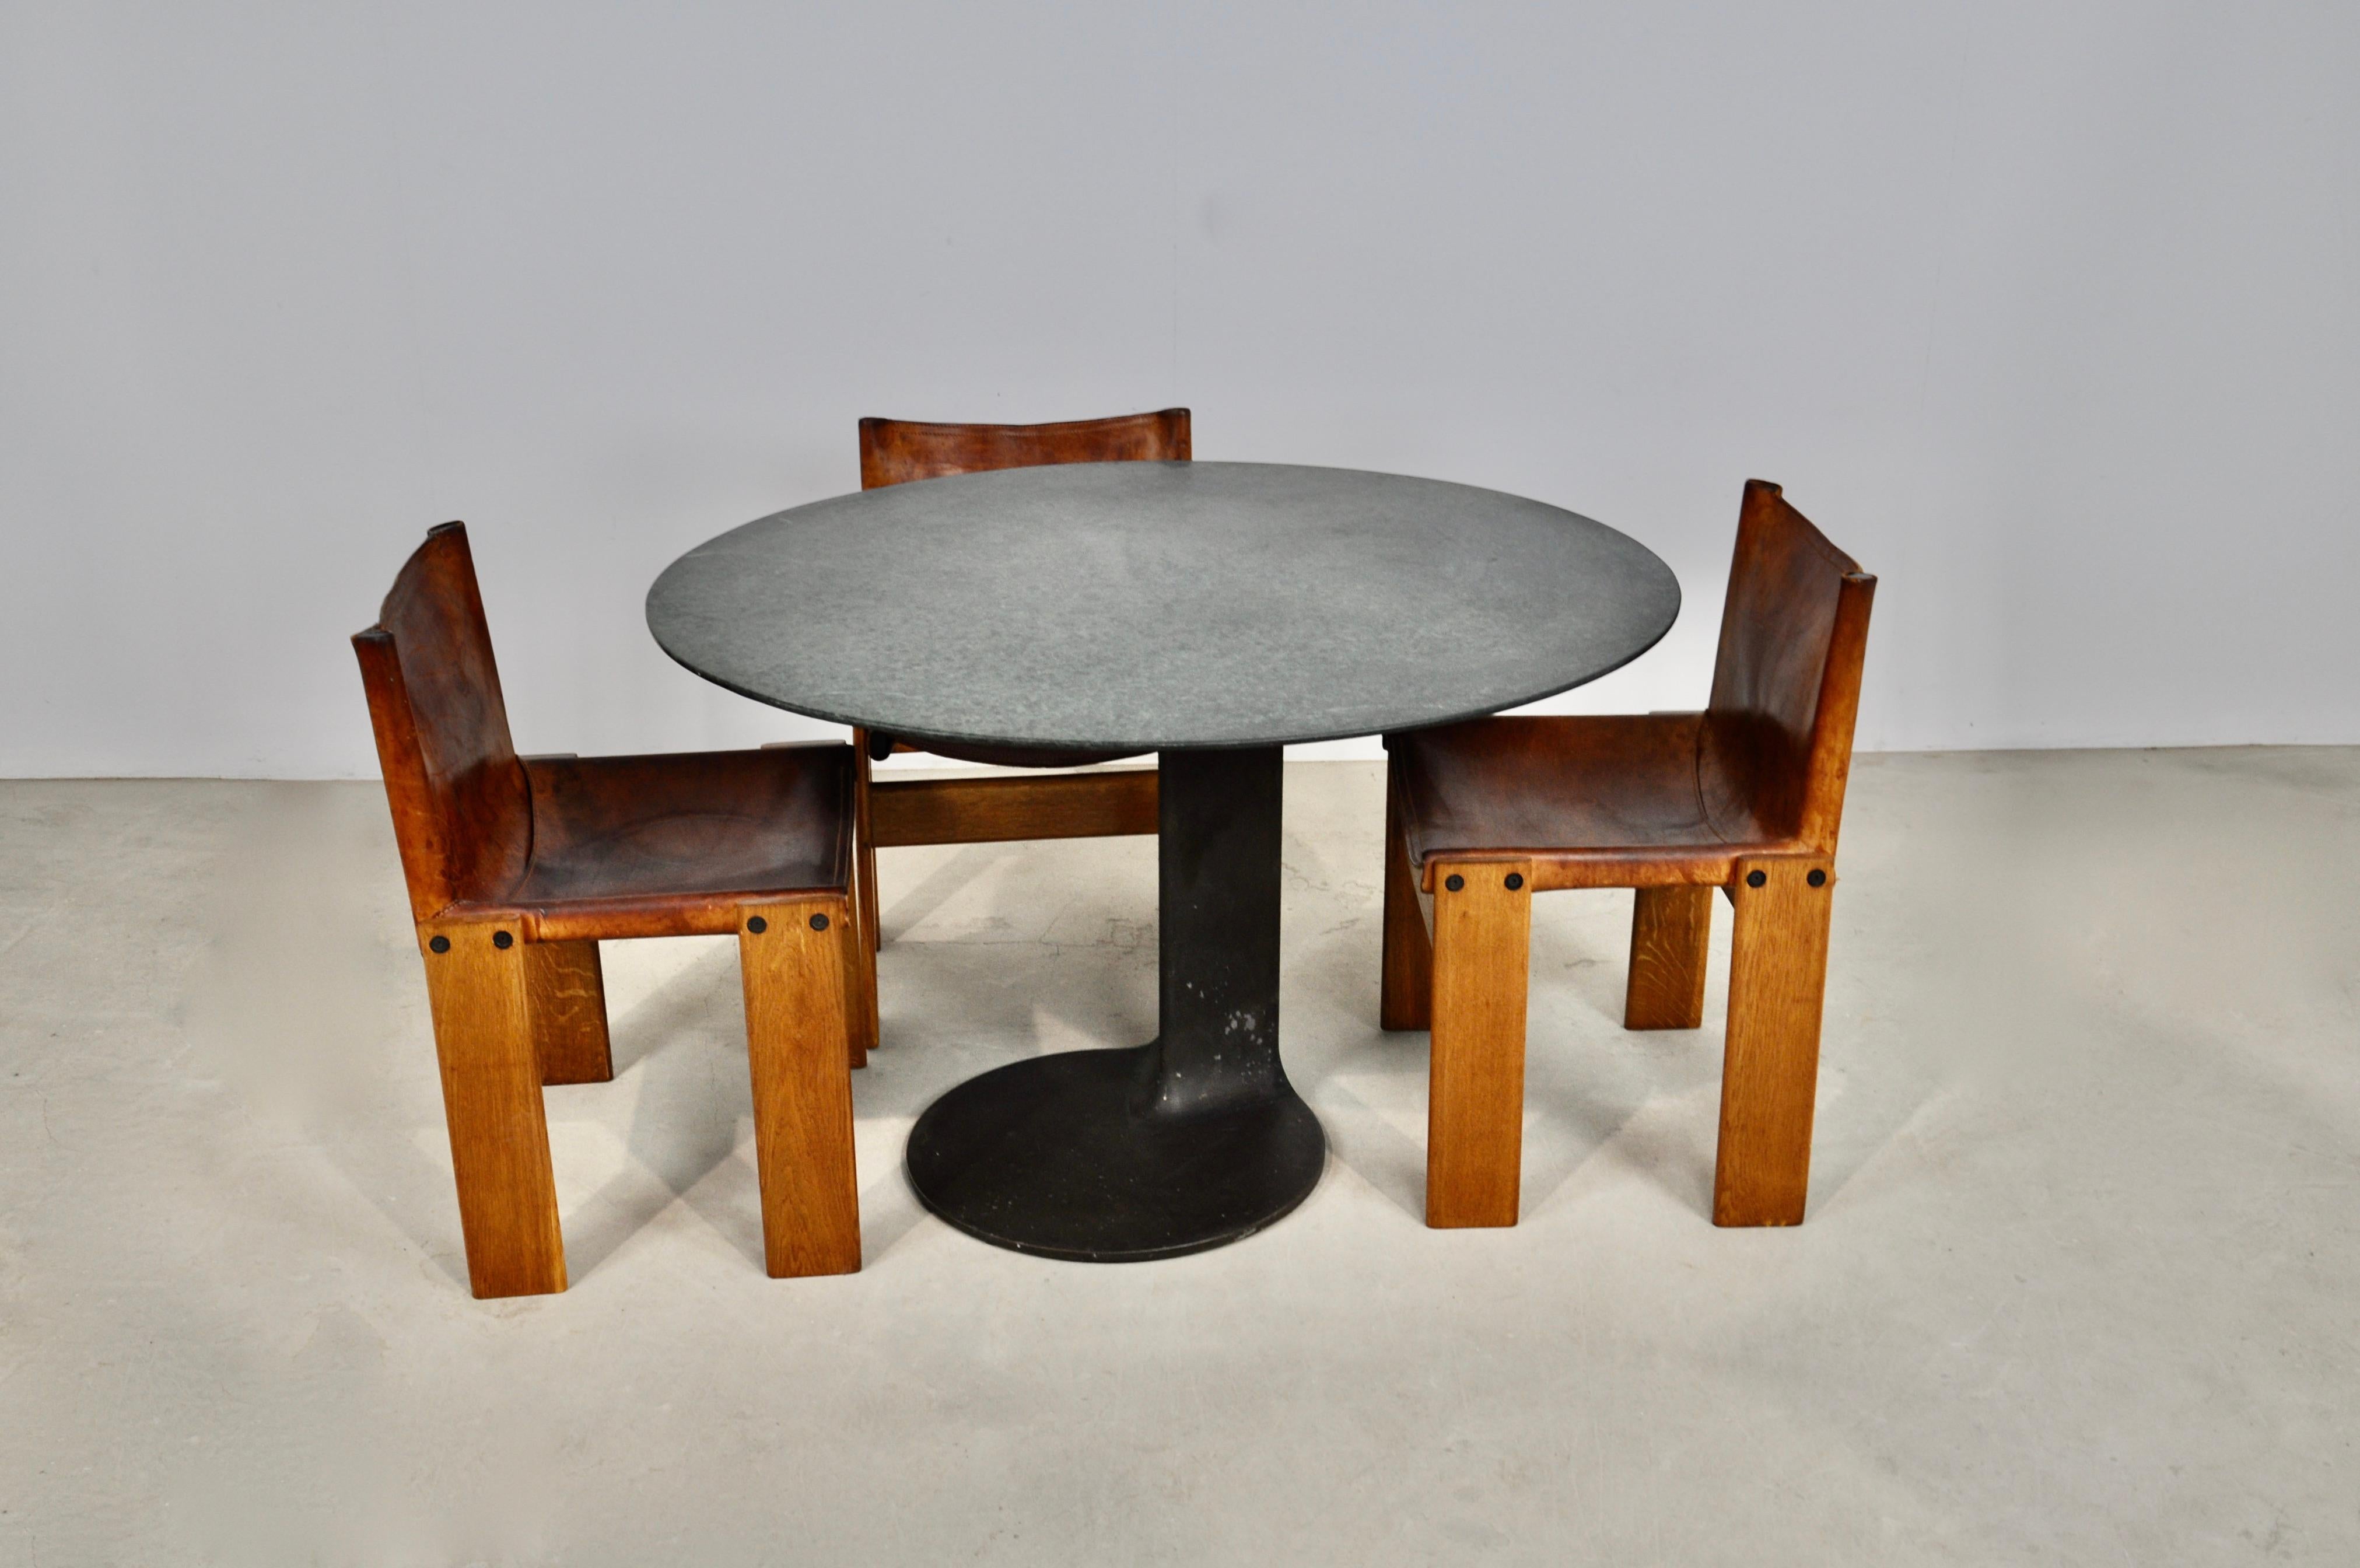 Table in green marble, foot in bronze. Wear due to time and age of the table (see photo).